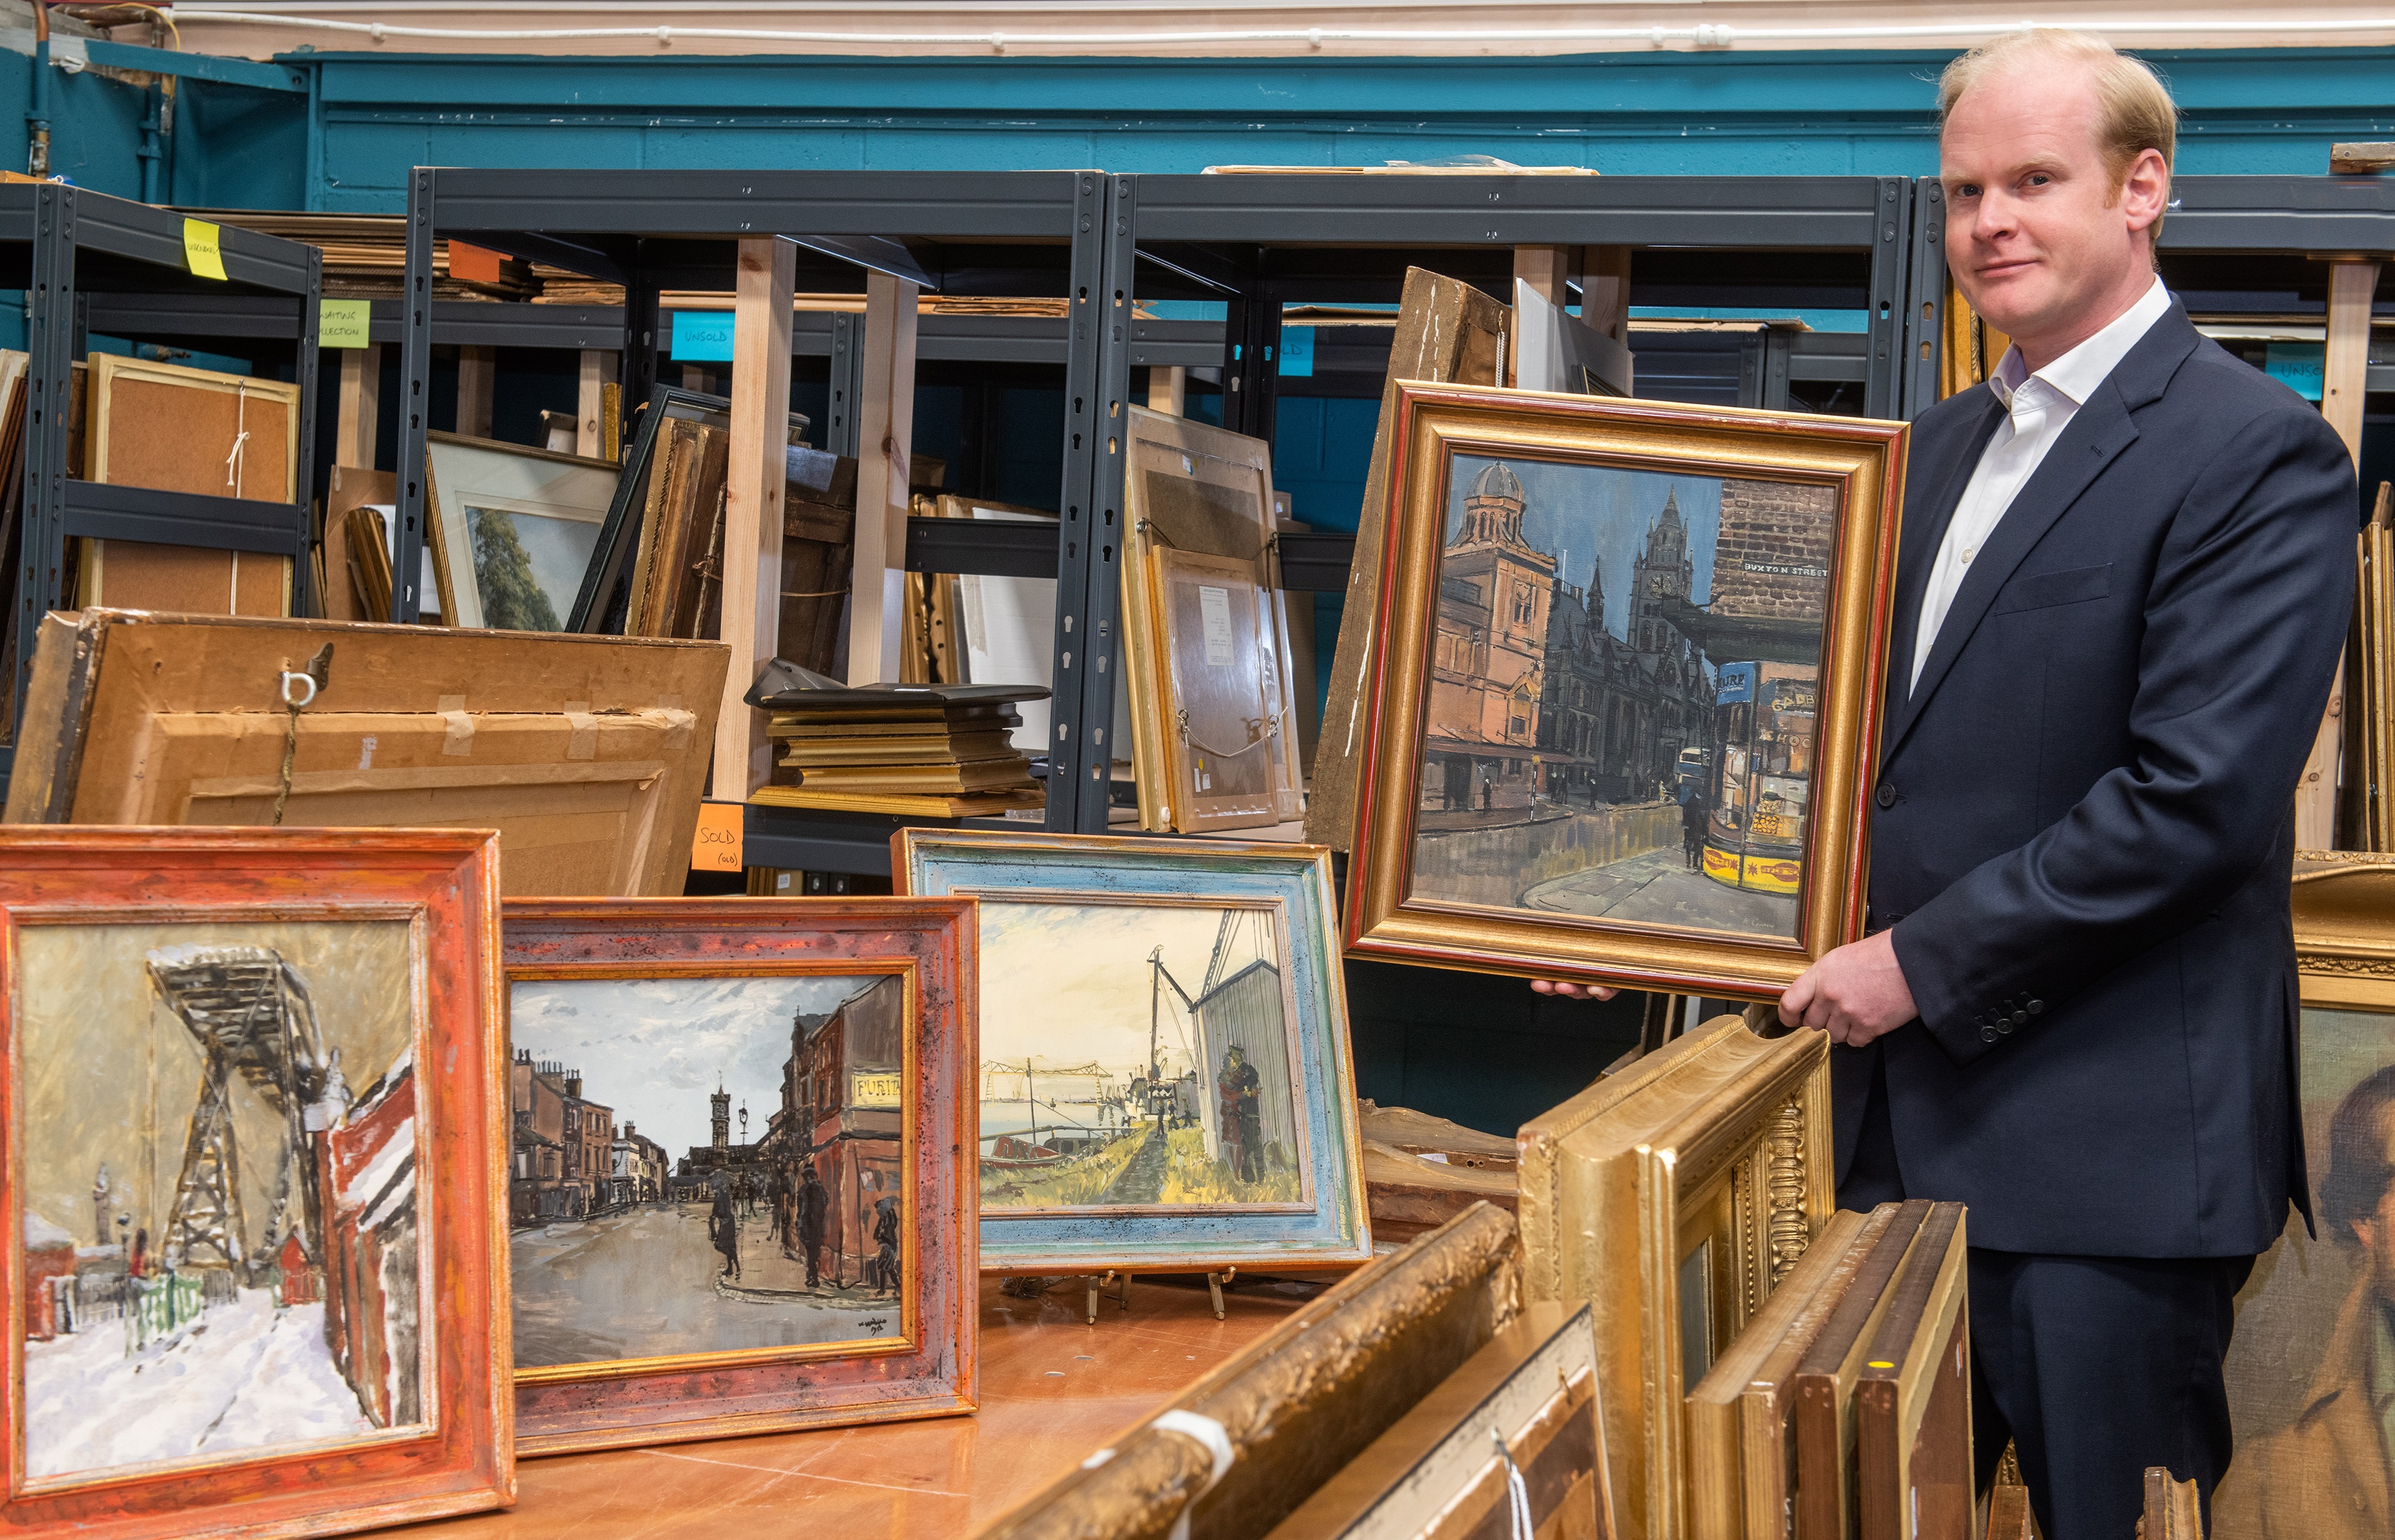 PAINTINGS GIVE UNIQUE GLIMPSE OF POST-WAR MIDDLESBROUGH